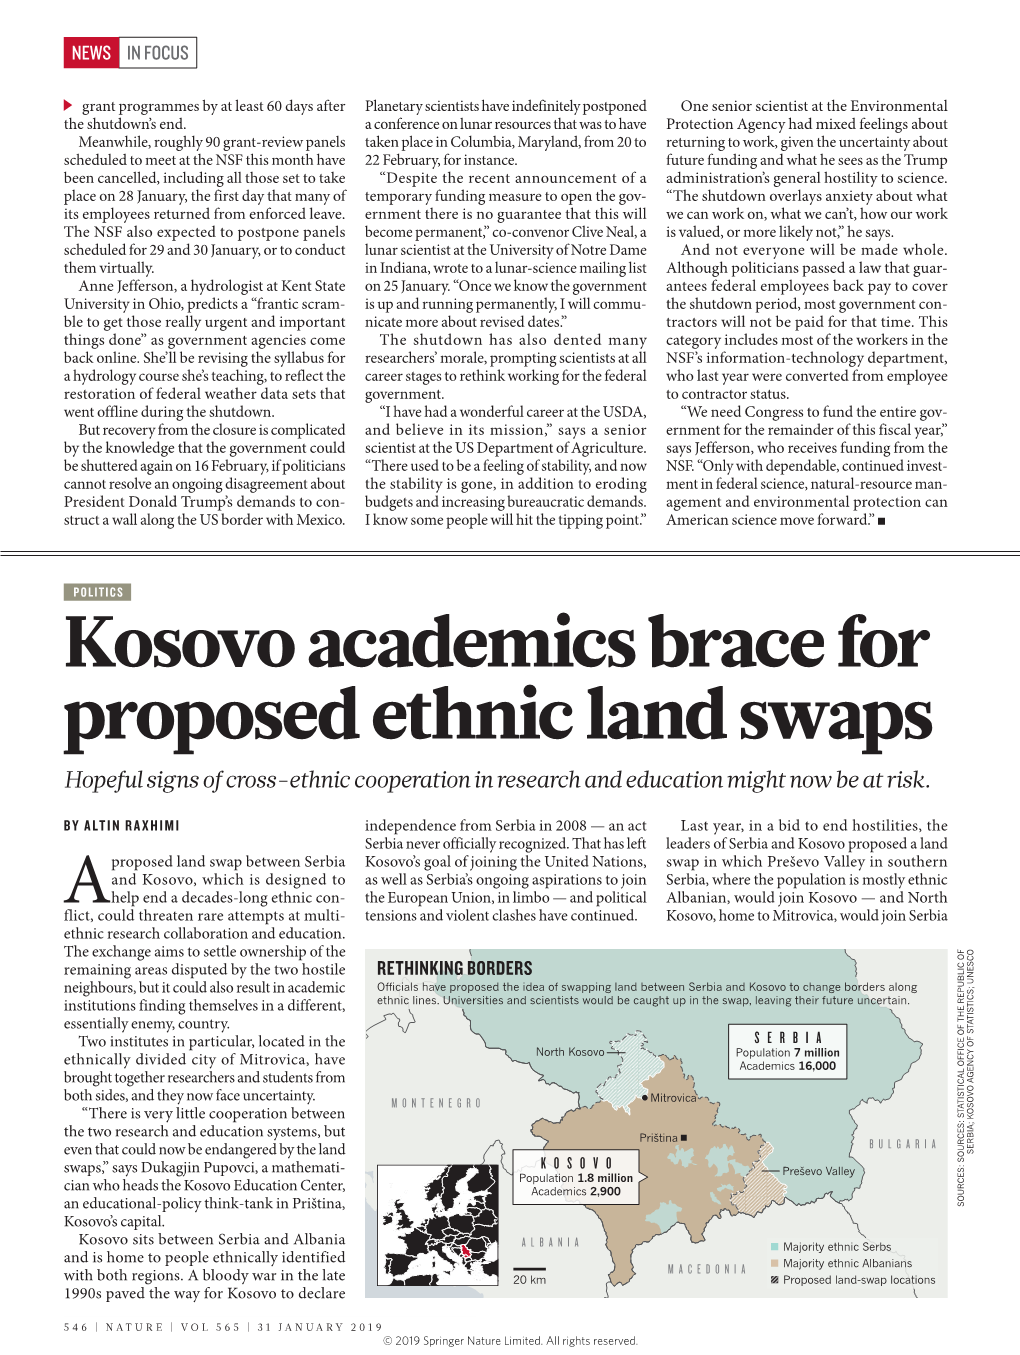 Kosovo Academics Brace for Proposed Ethnic Land Swaps Hopeful Signs of Cross-Ethnic Cooperation in Research and Education Might Now Be at Risk